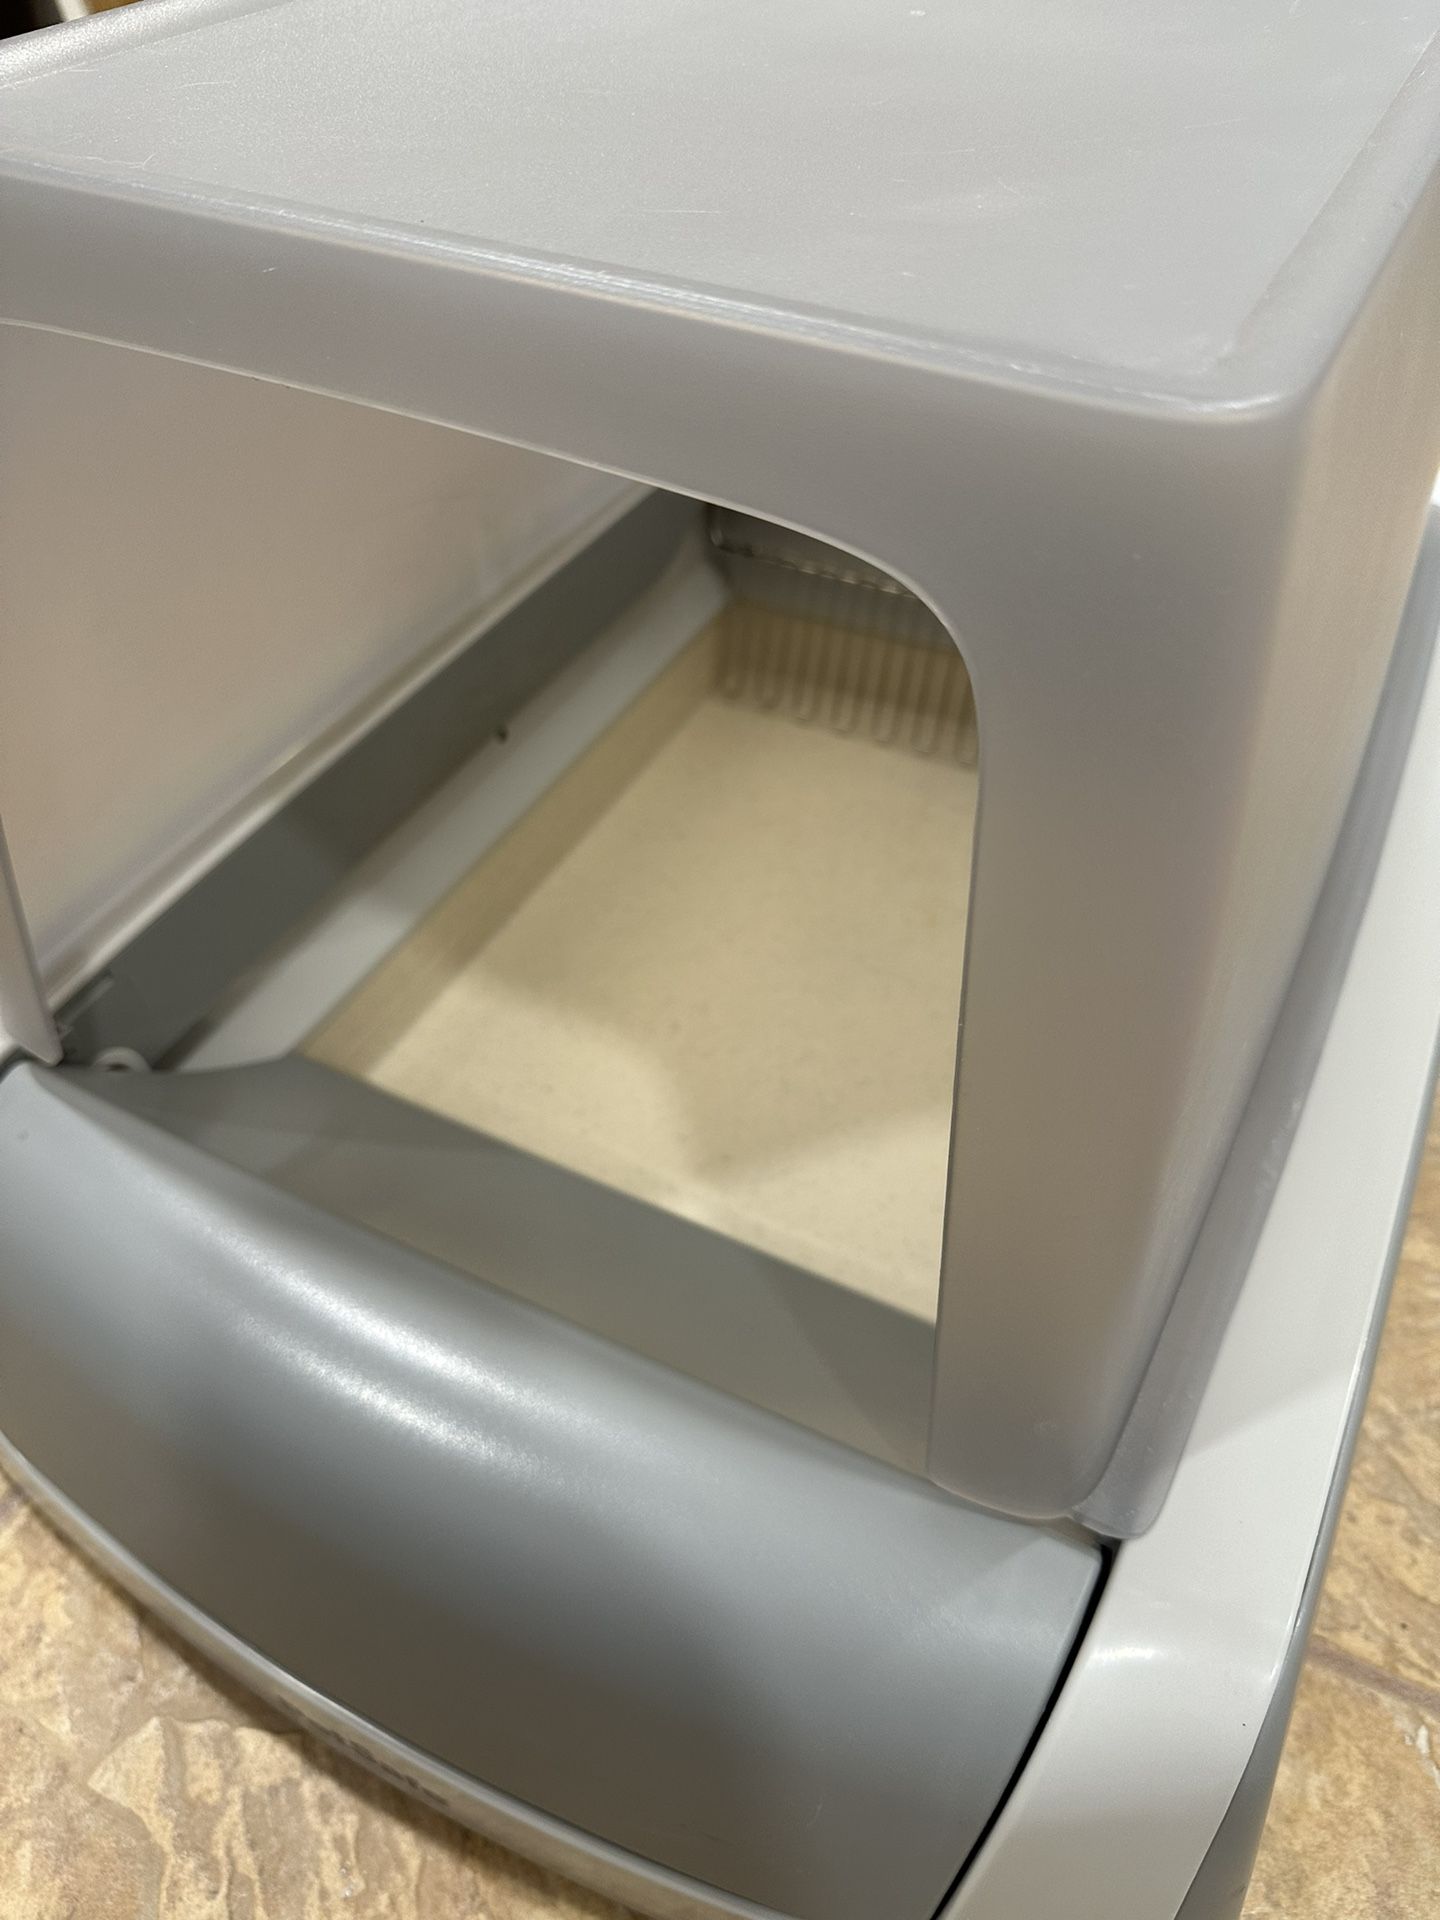 Petsafe scoop free (cat litter box) with washable/reusable tray